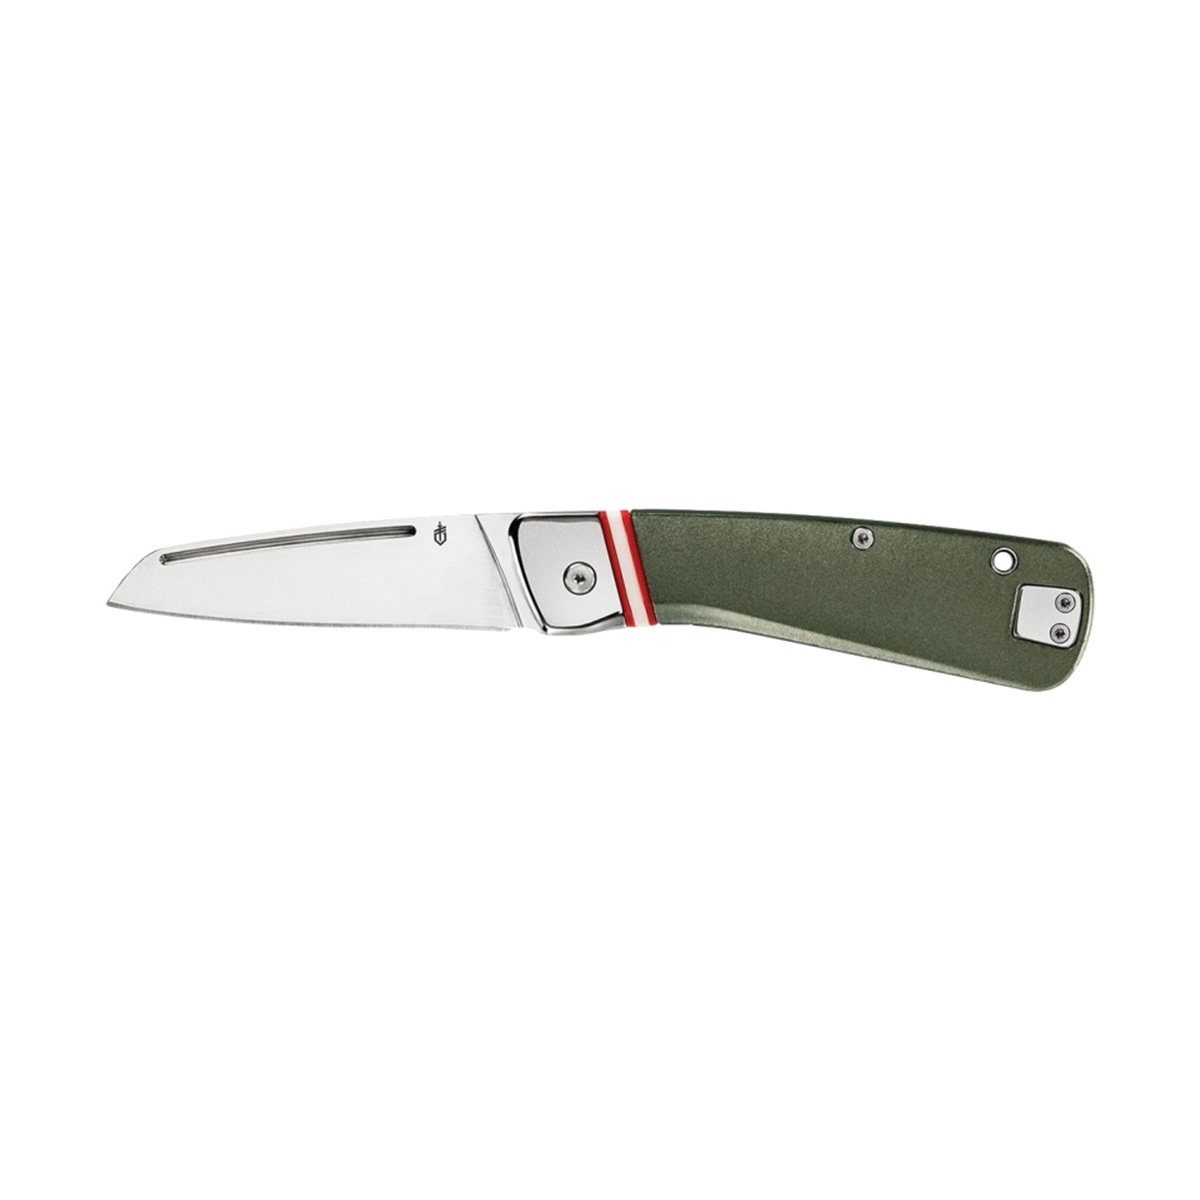 31-003722 Folding Pocket Knife, 2.9 in L Blade, Stainless Steel Blade, 1-Blade, Green Handle